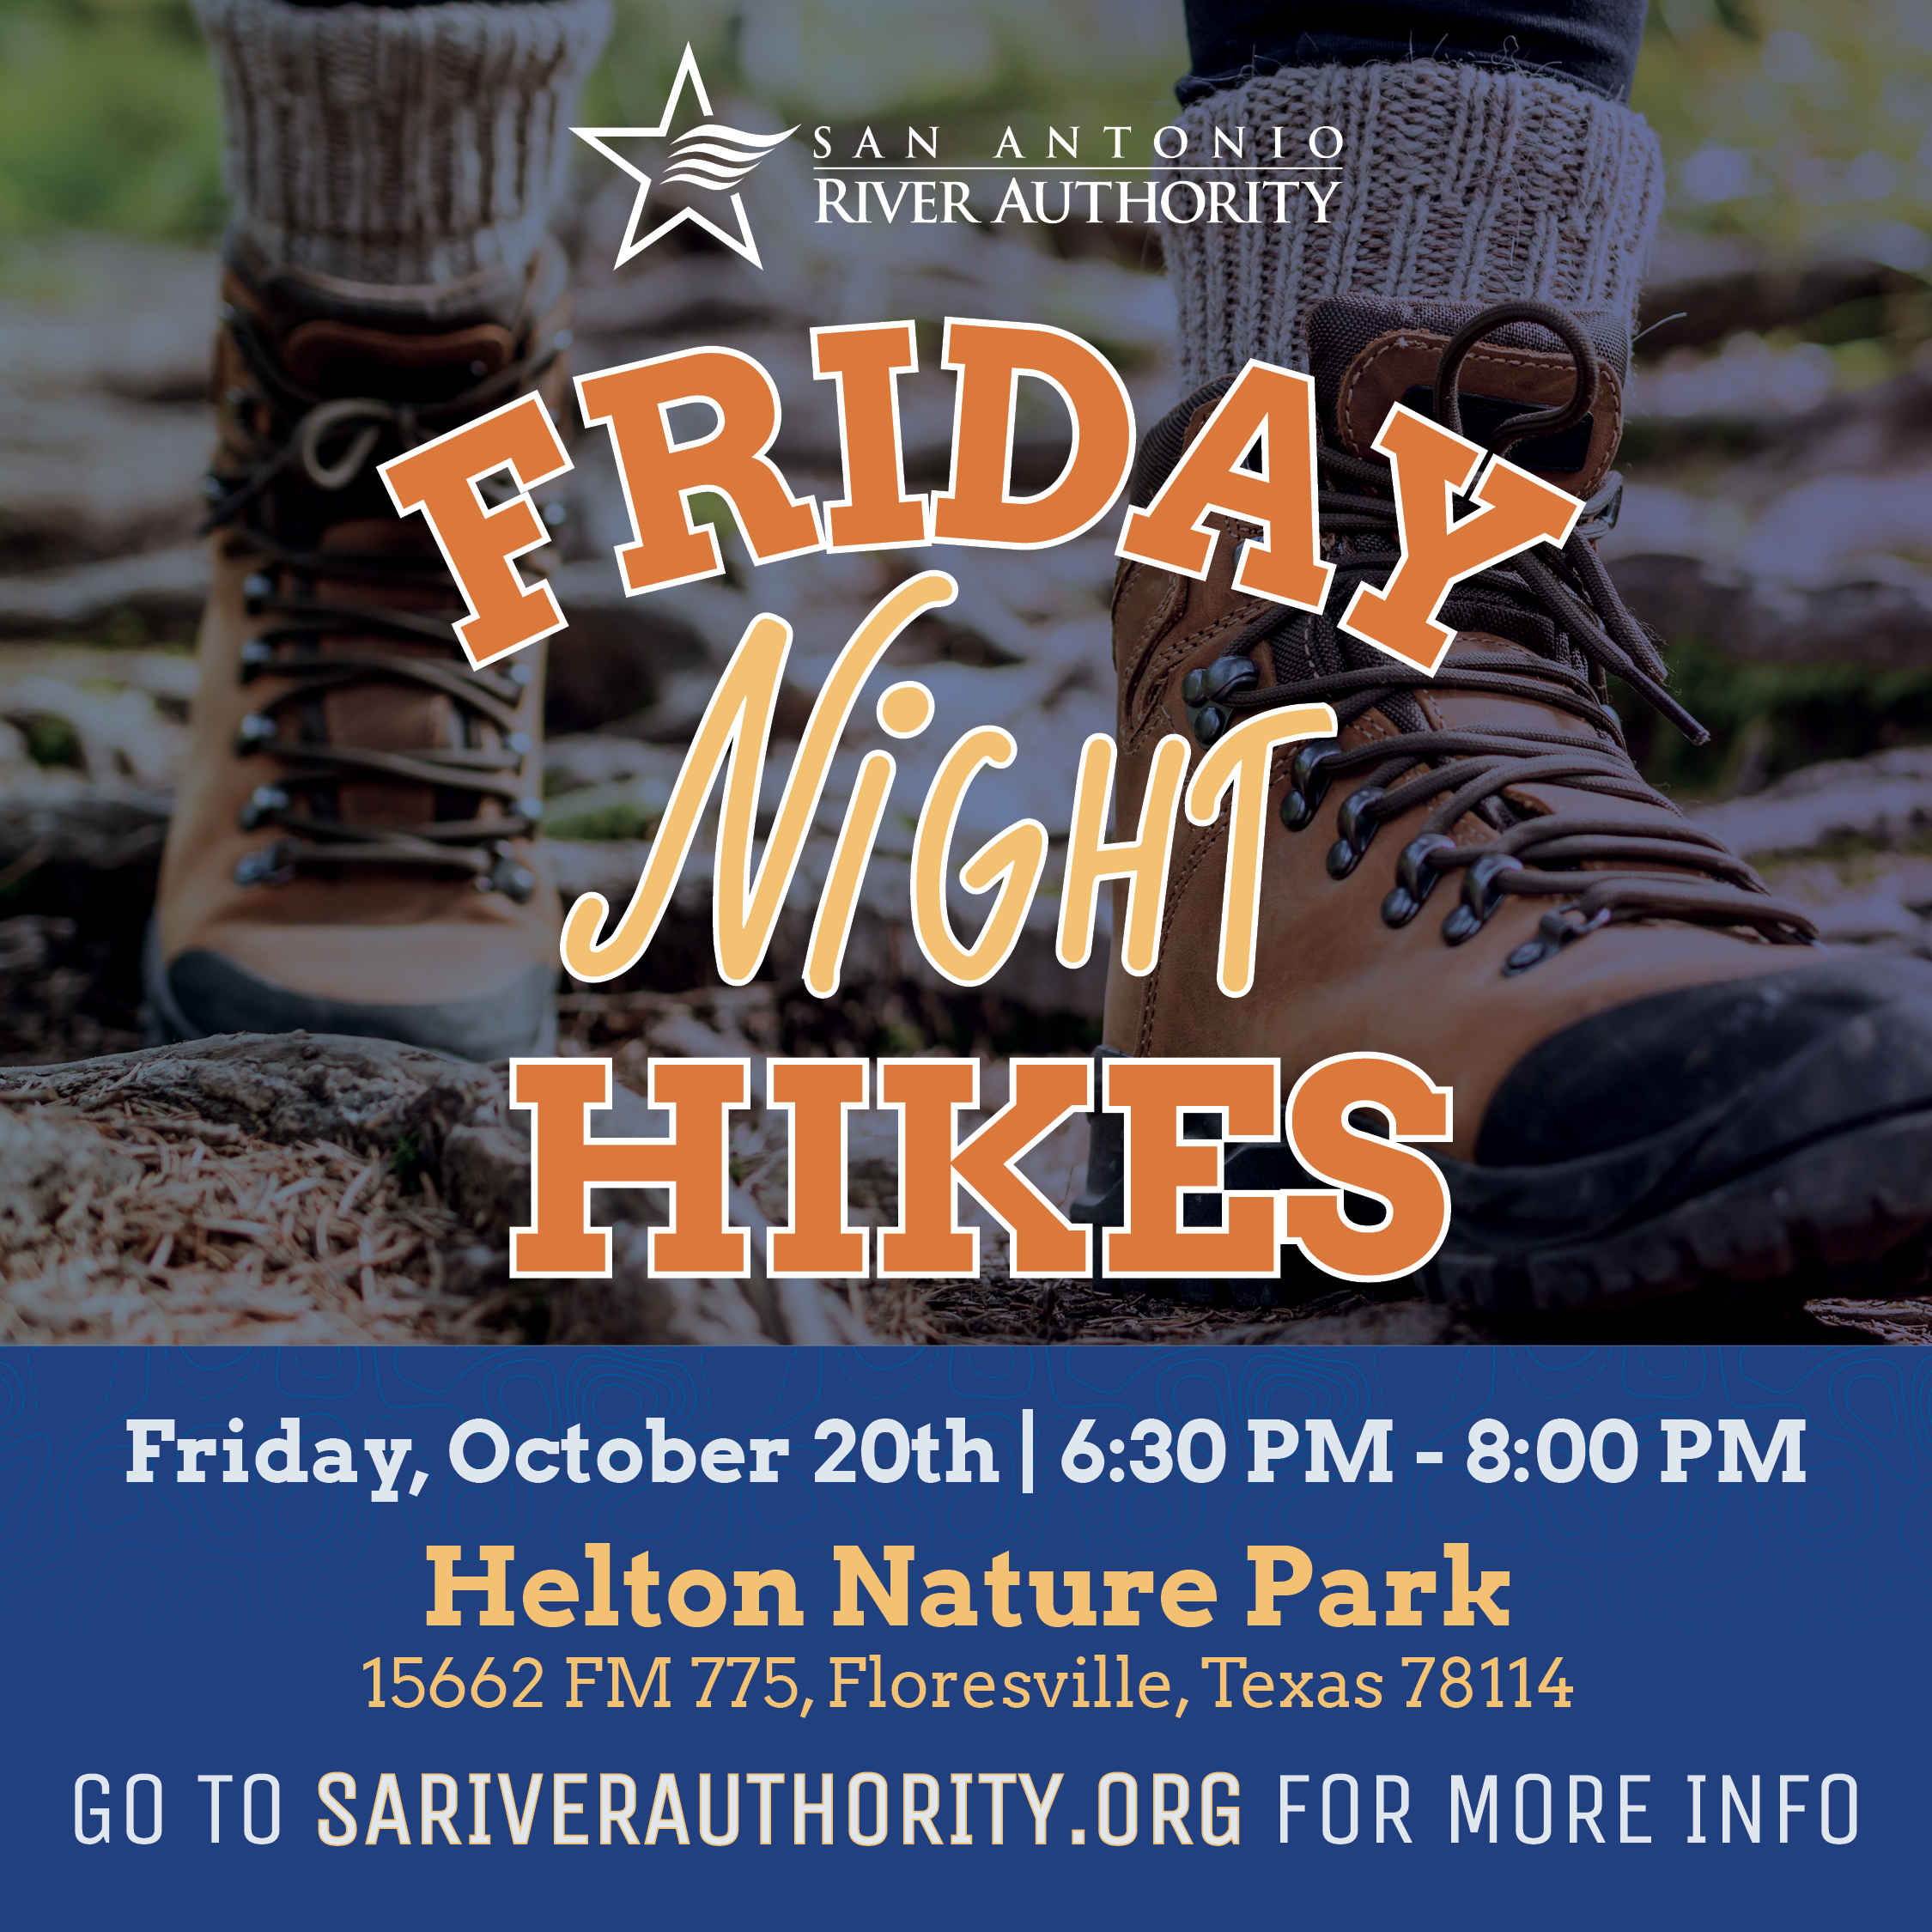 Friday Night Hikes October 20 at Helton Nature Park